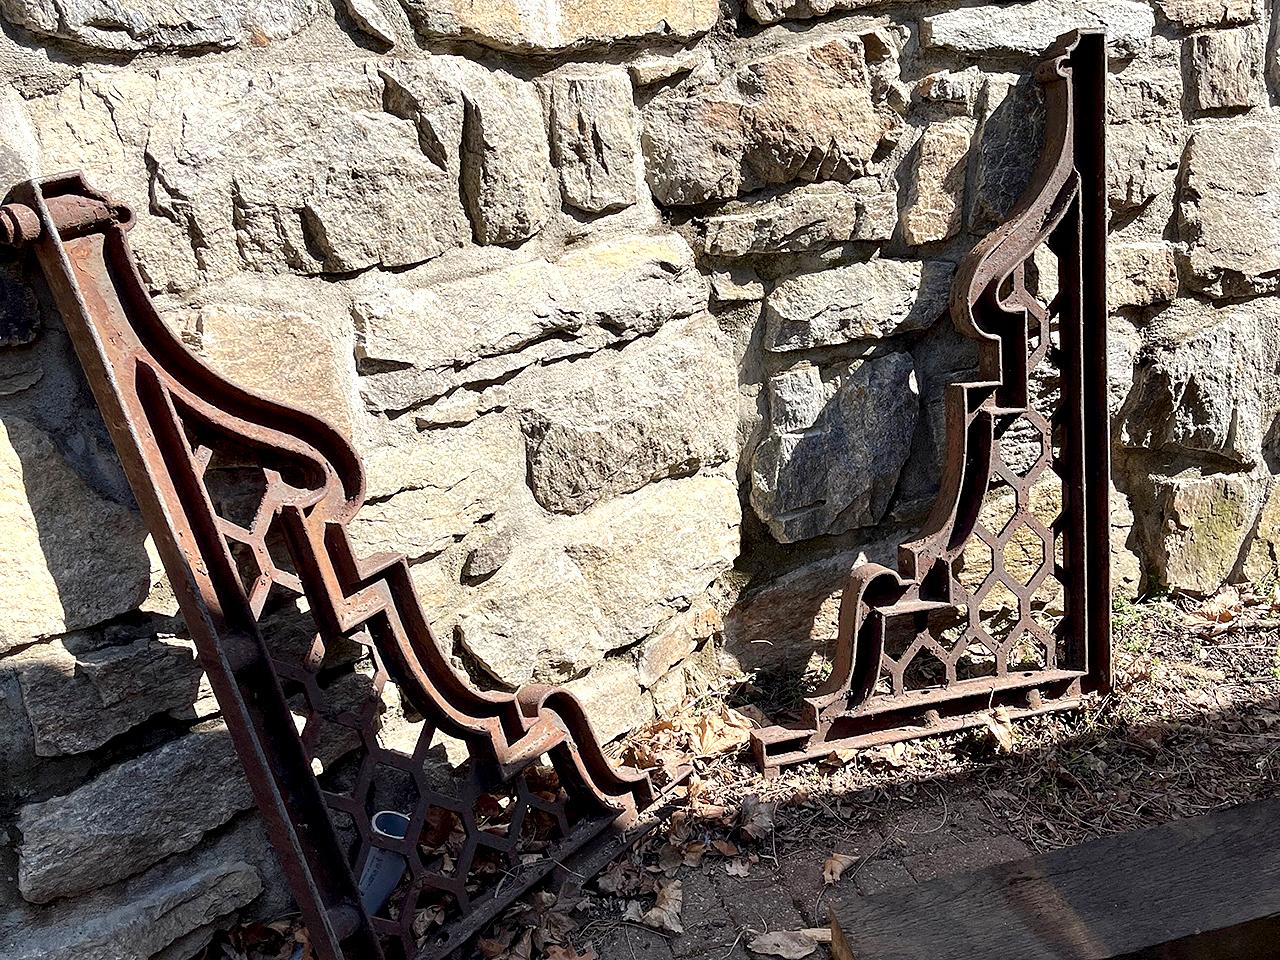 This is an interesting and decorative pair of building brackets. They are heavy and perfect holding a stair platform, awning or balcony.